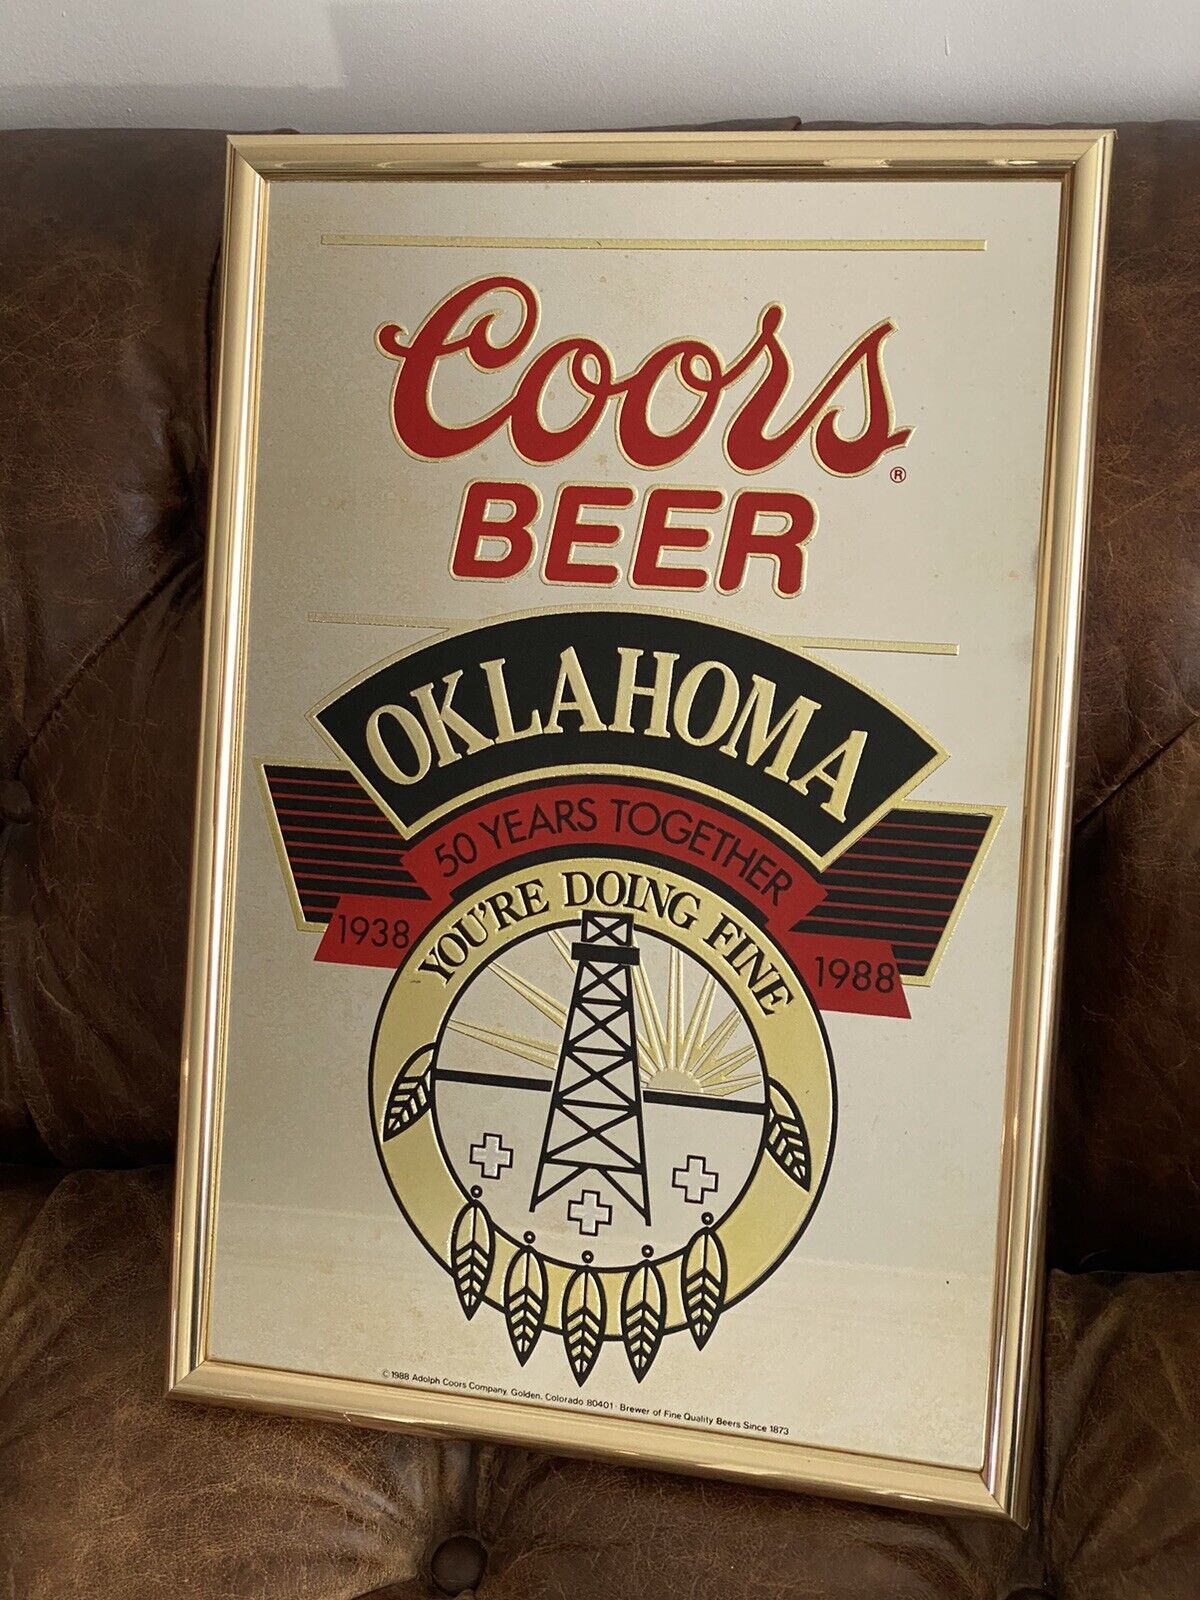 Vintage 1988 Coors Beer Mirror Sign | Oklahoma 100 Years Together